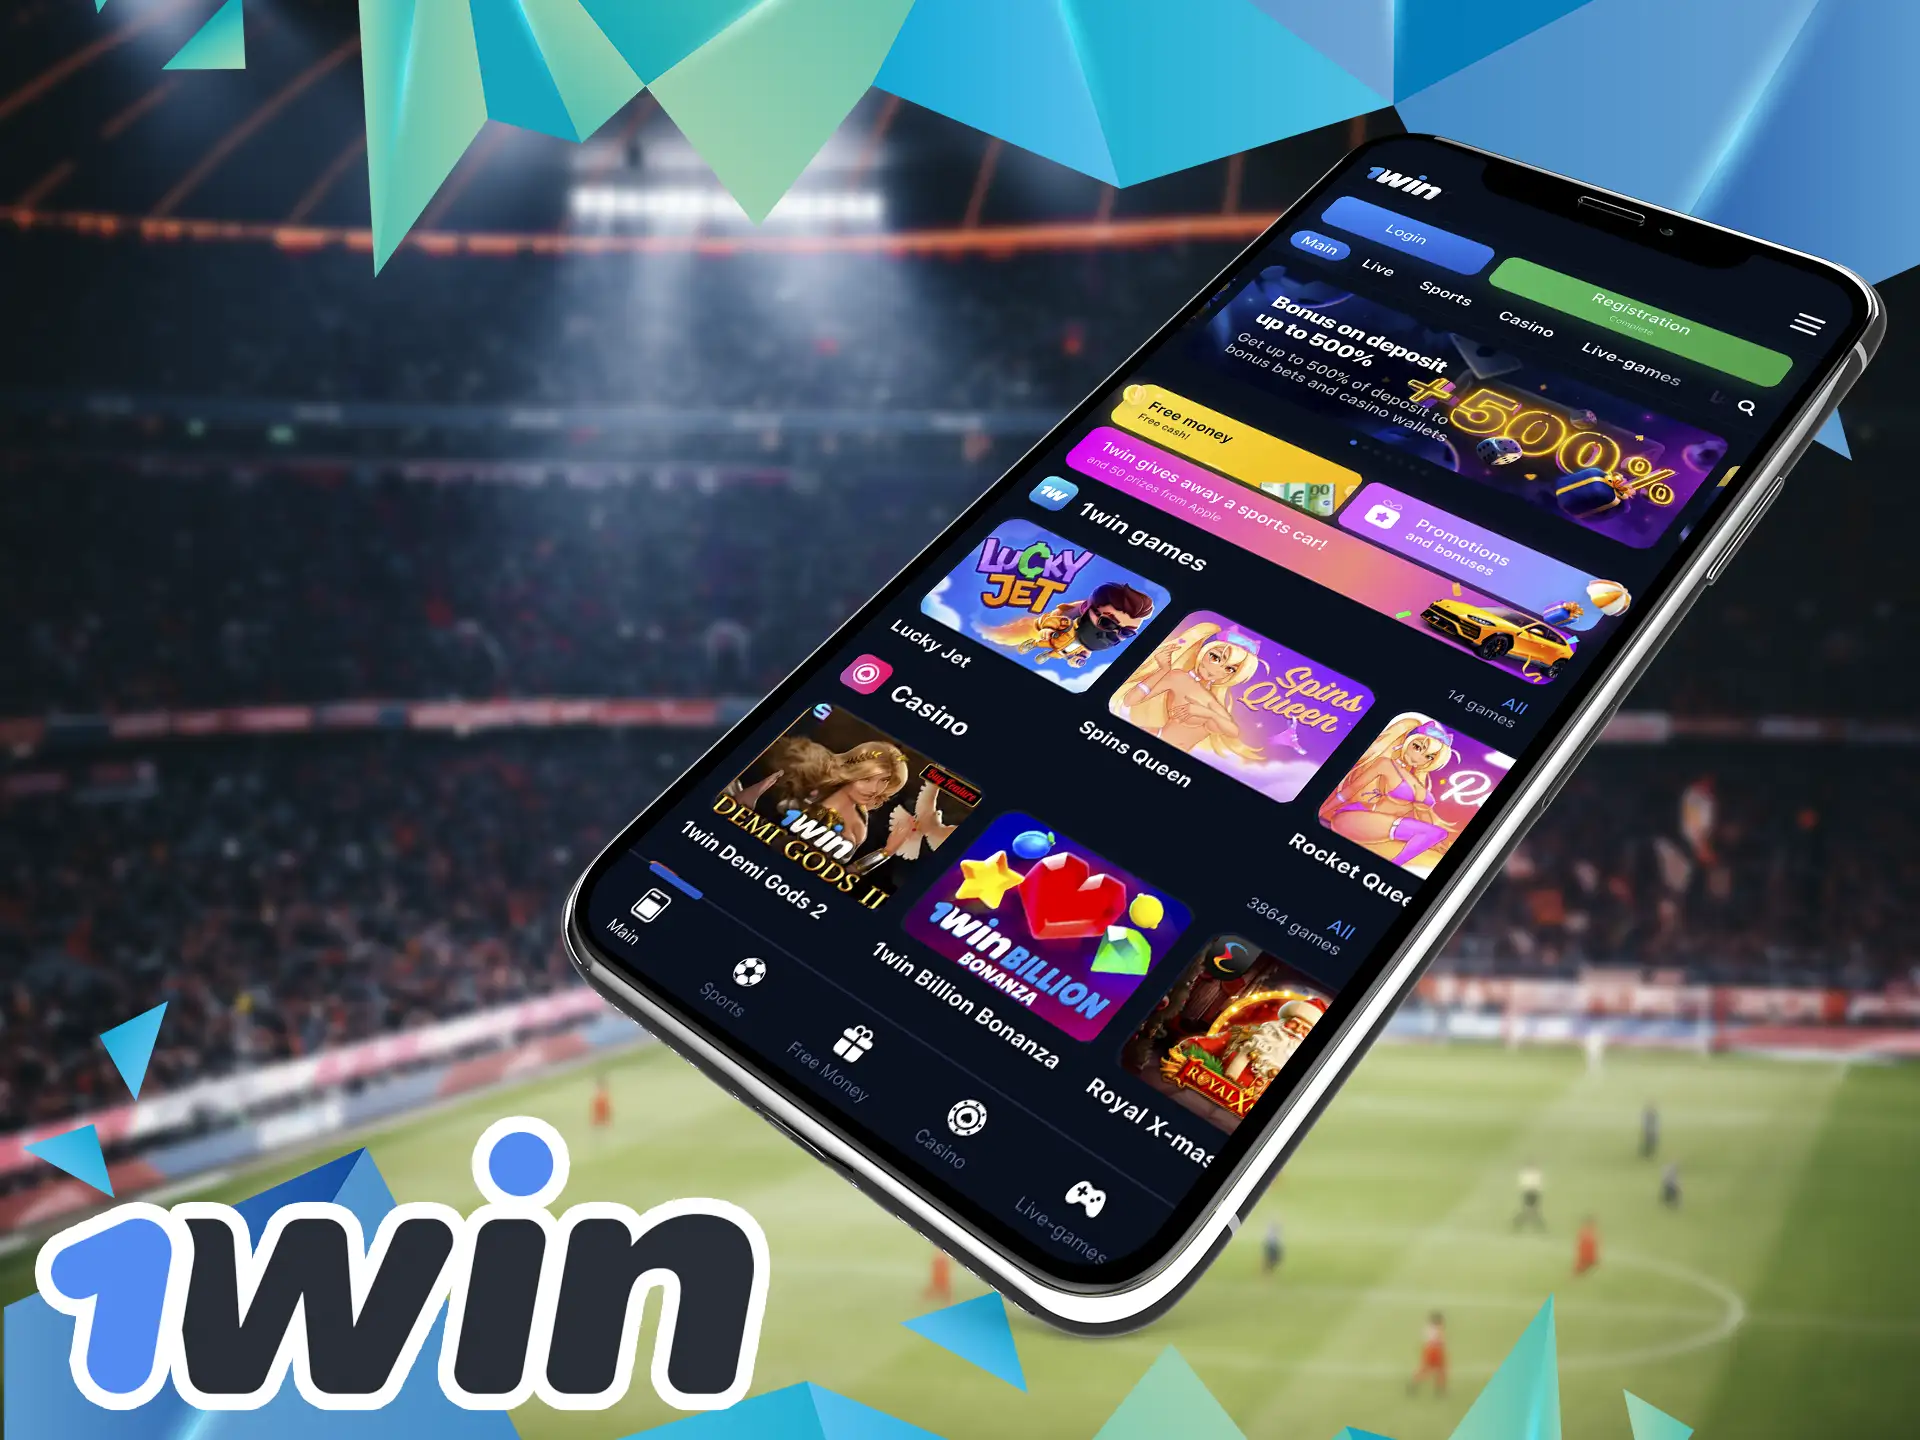 This software from the company 1Win offers users from India an abundance of bonuses and have best betting app for football.